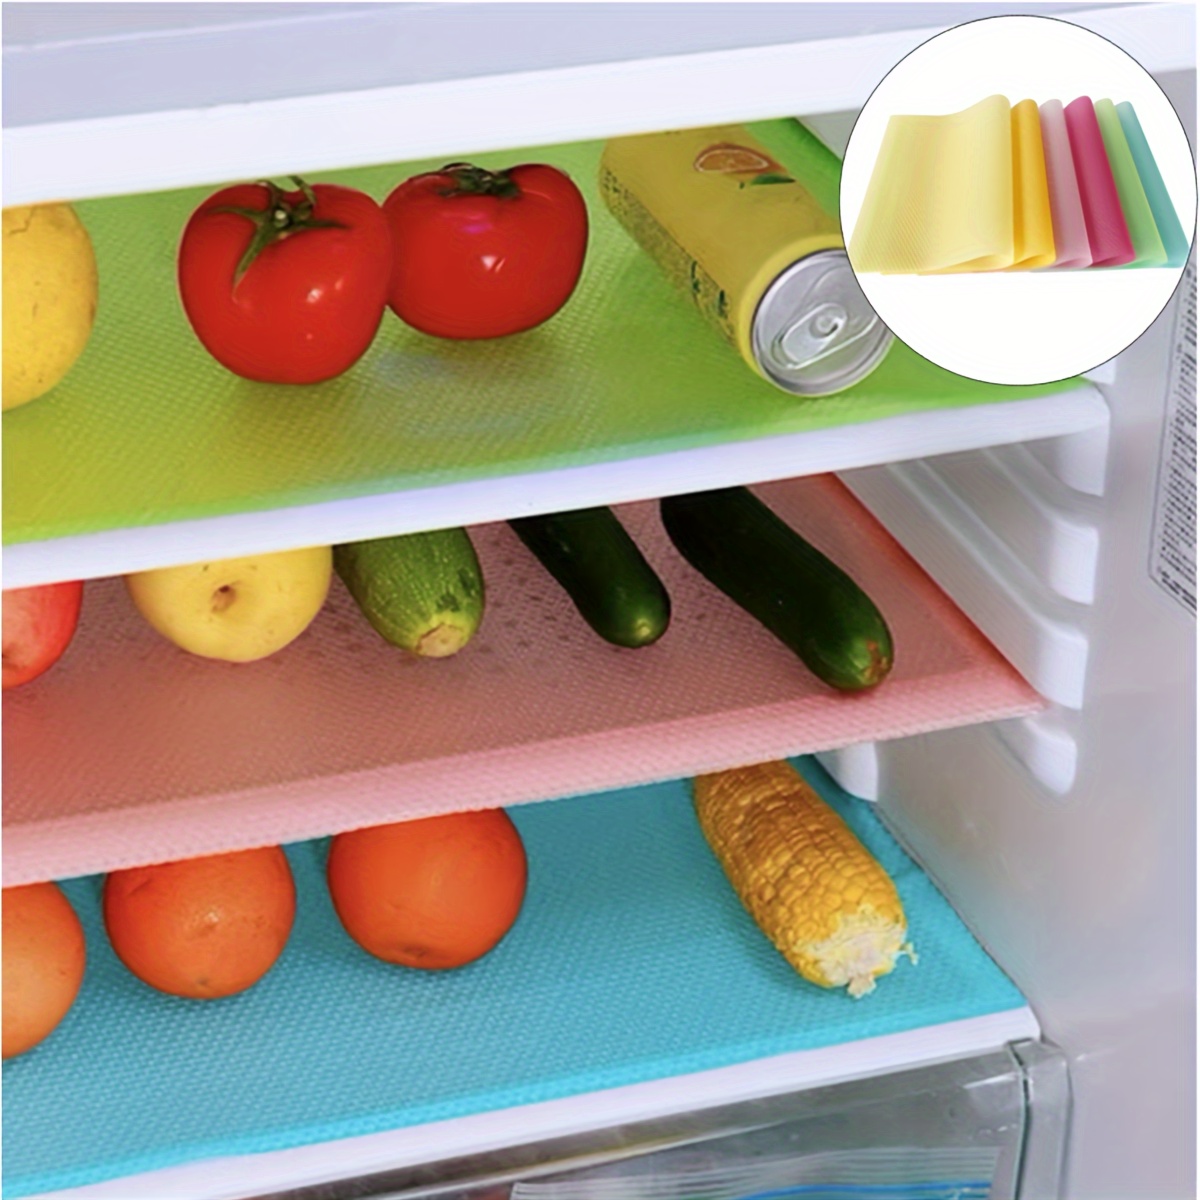 4pcs Refrigerator Liners Mats Washable, Refrigerator Mats Liner Waterproof  Oilproof, Fridge Liners For Shelves, Cover Pads For Freezer Glass Shelf  Cupboard Cabinet Drawer